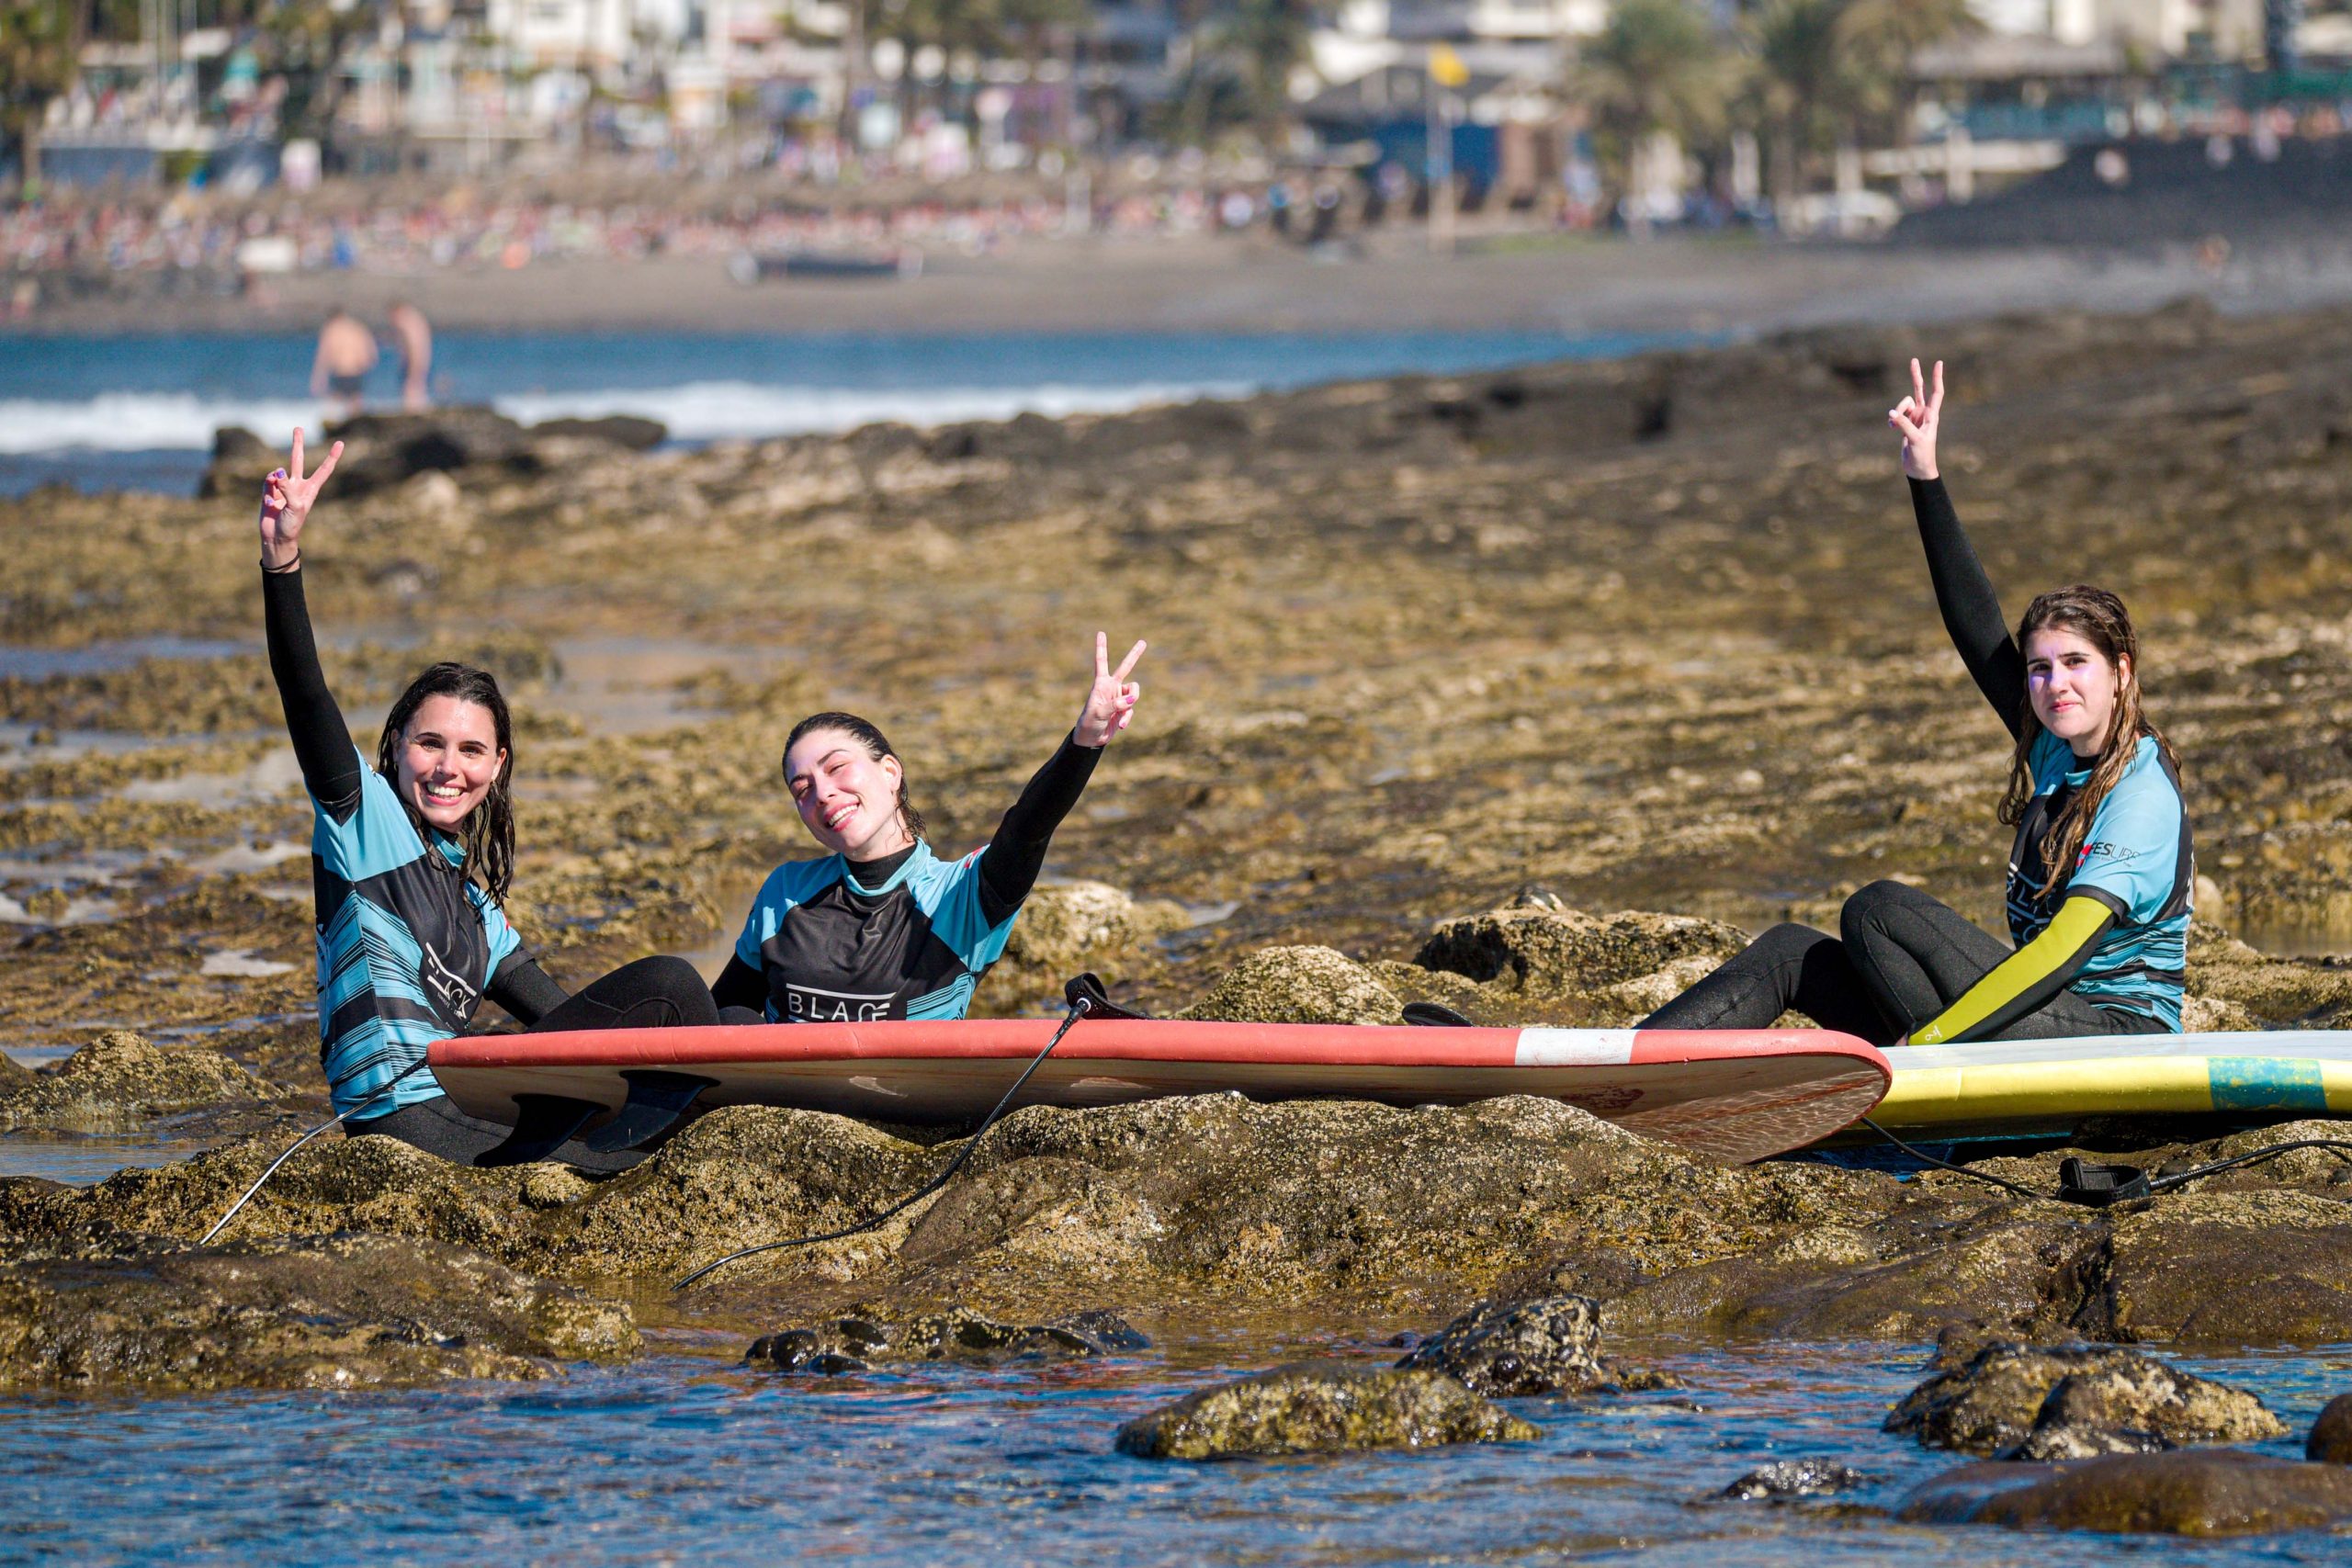 Blackstone Surf Center students in Playa las Américas in Tenerife after a surf lesson